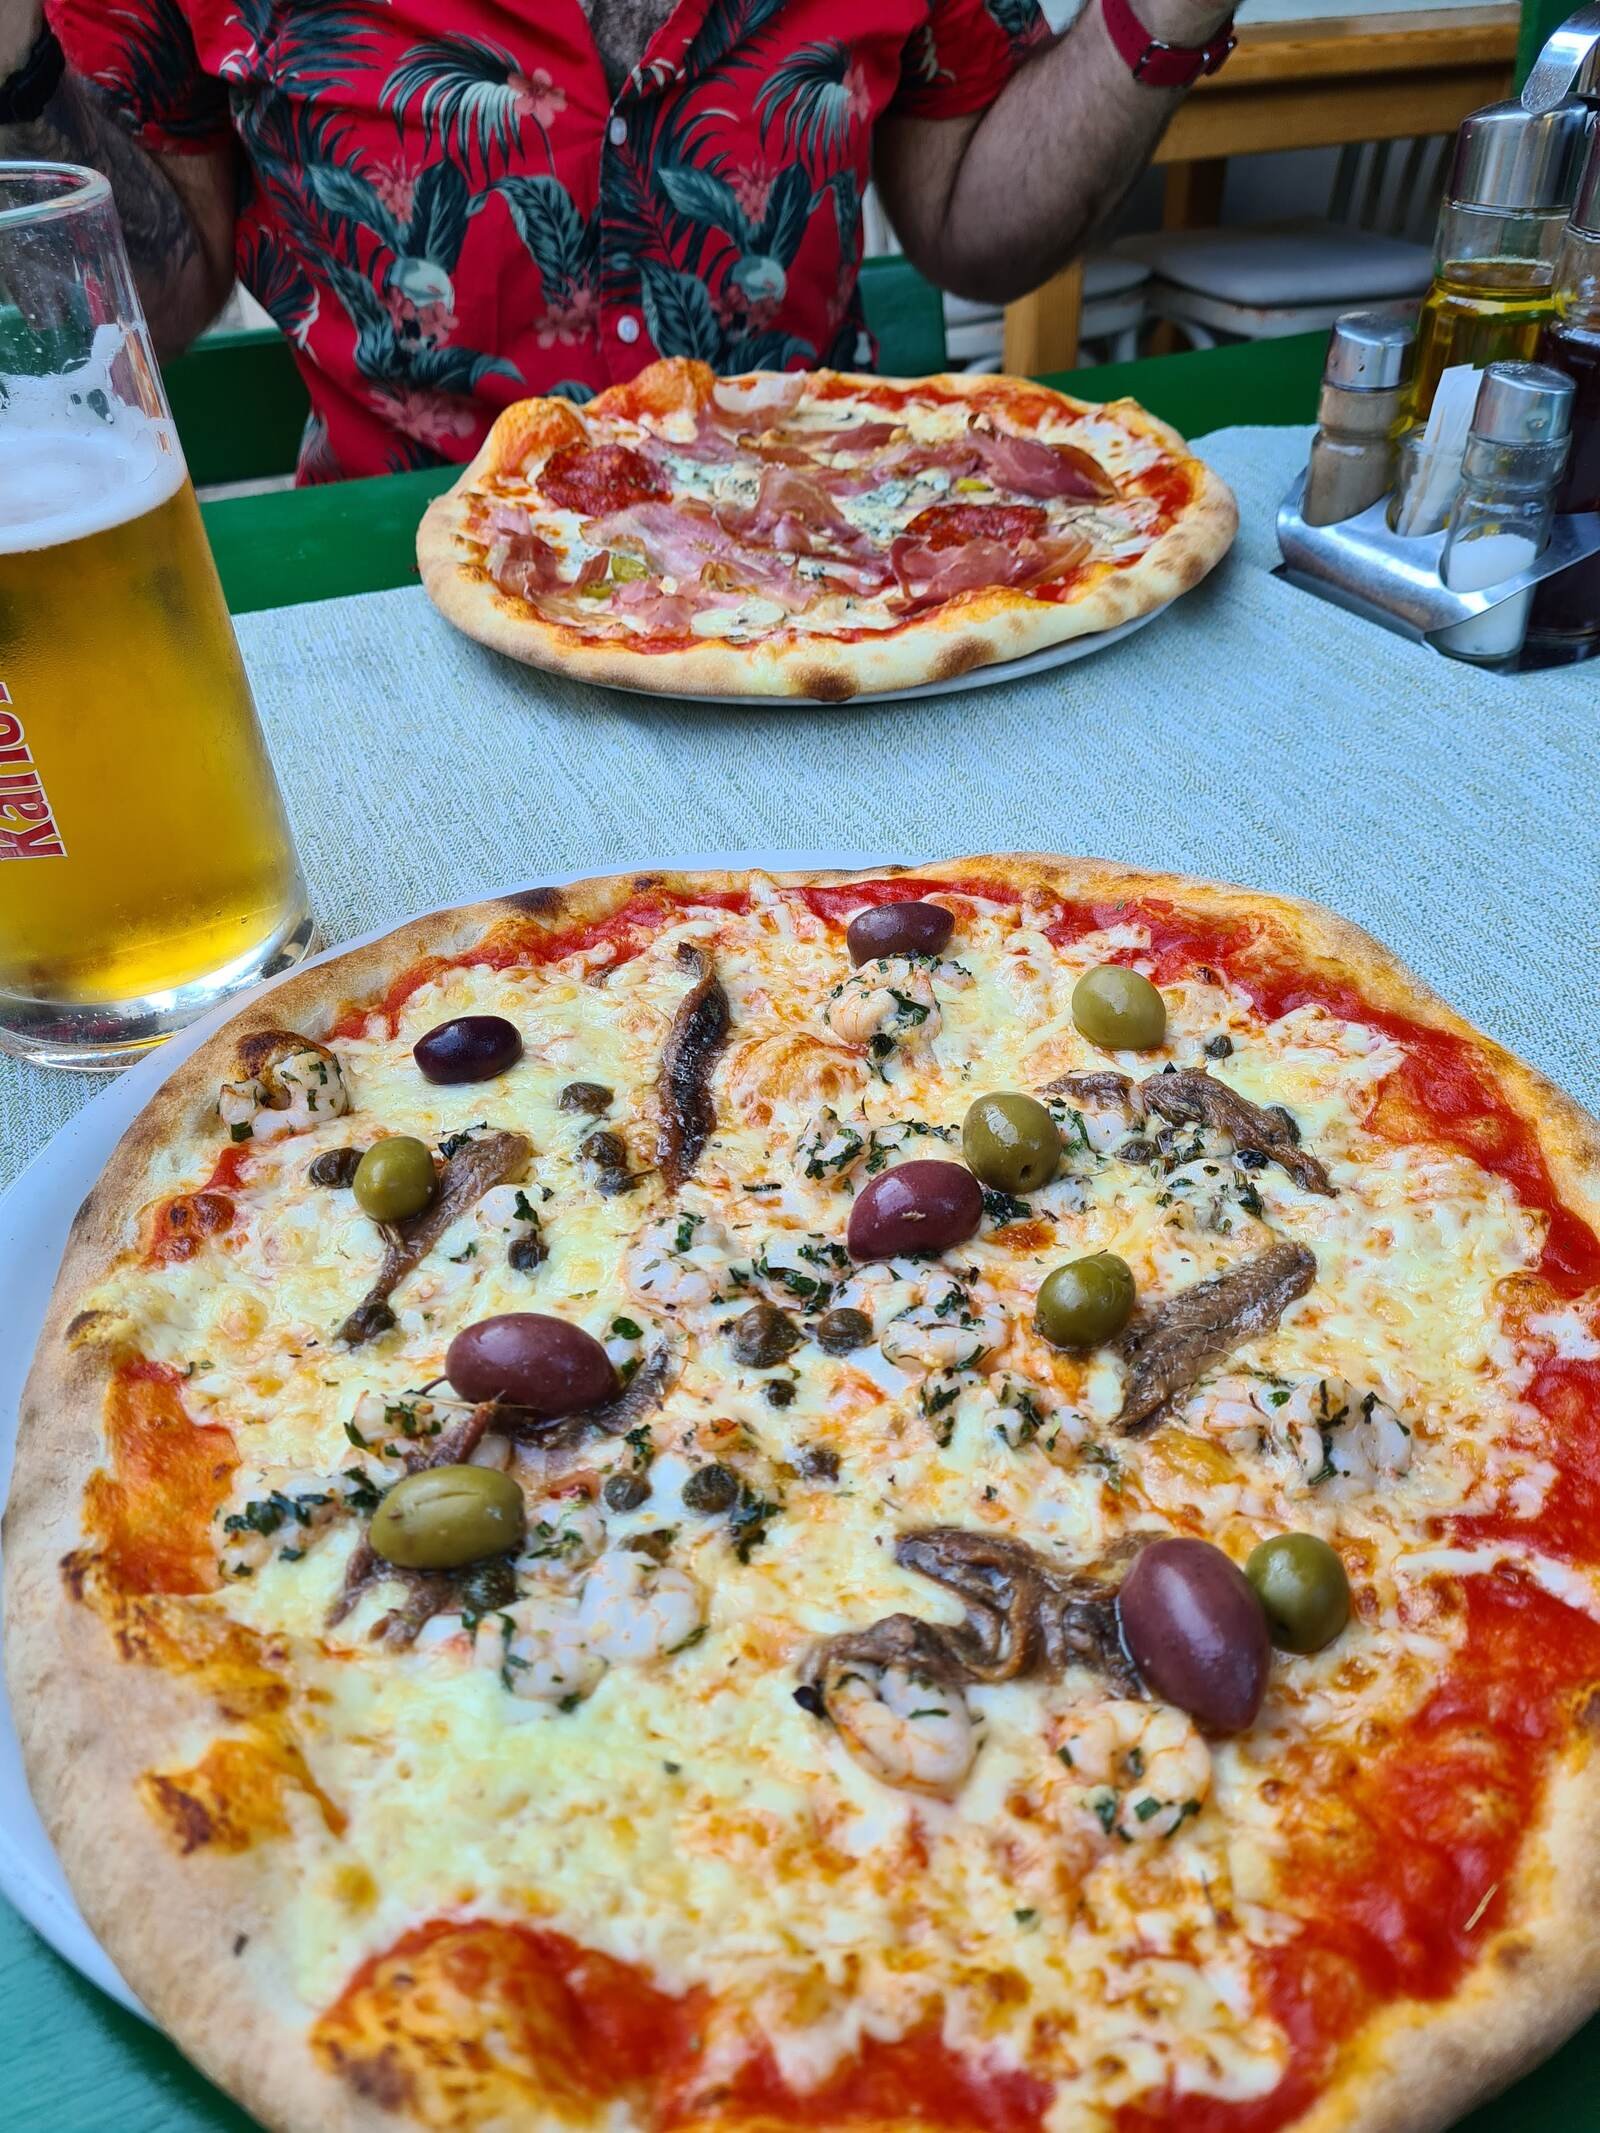 Two large hot pizzas with lots of cheese and multiple toppings